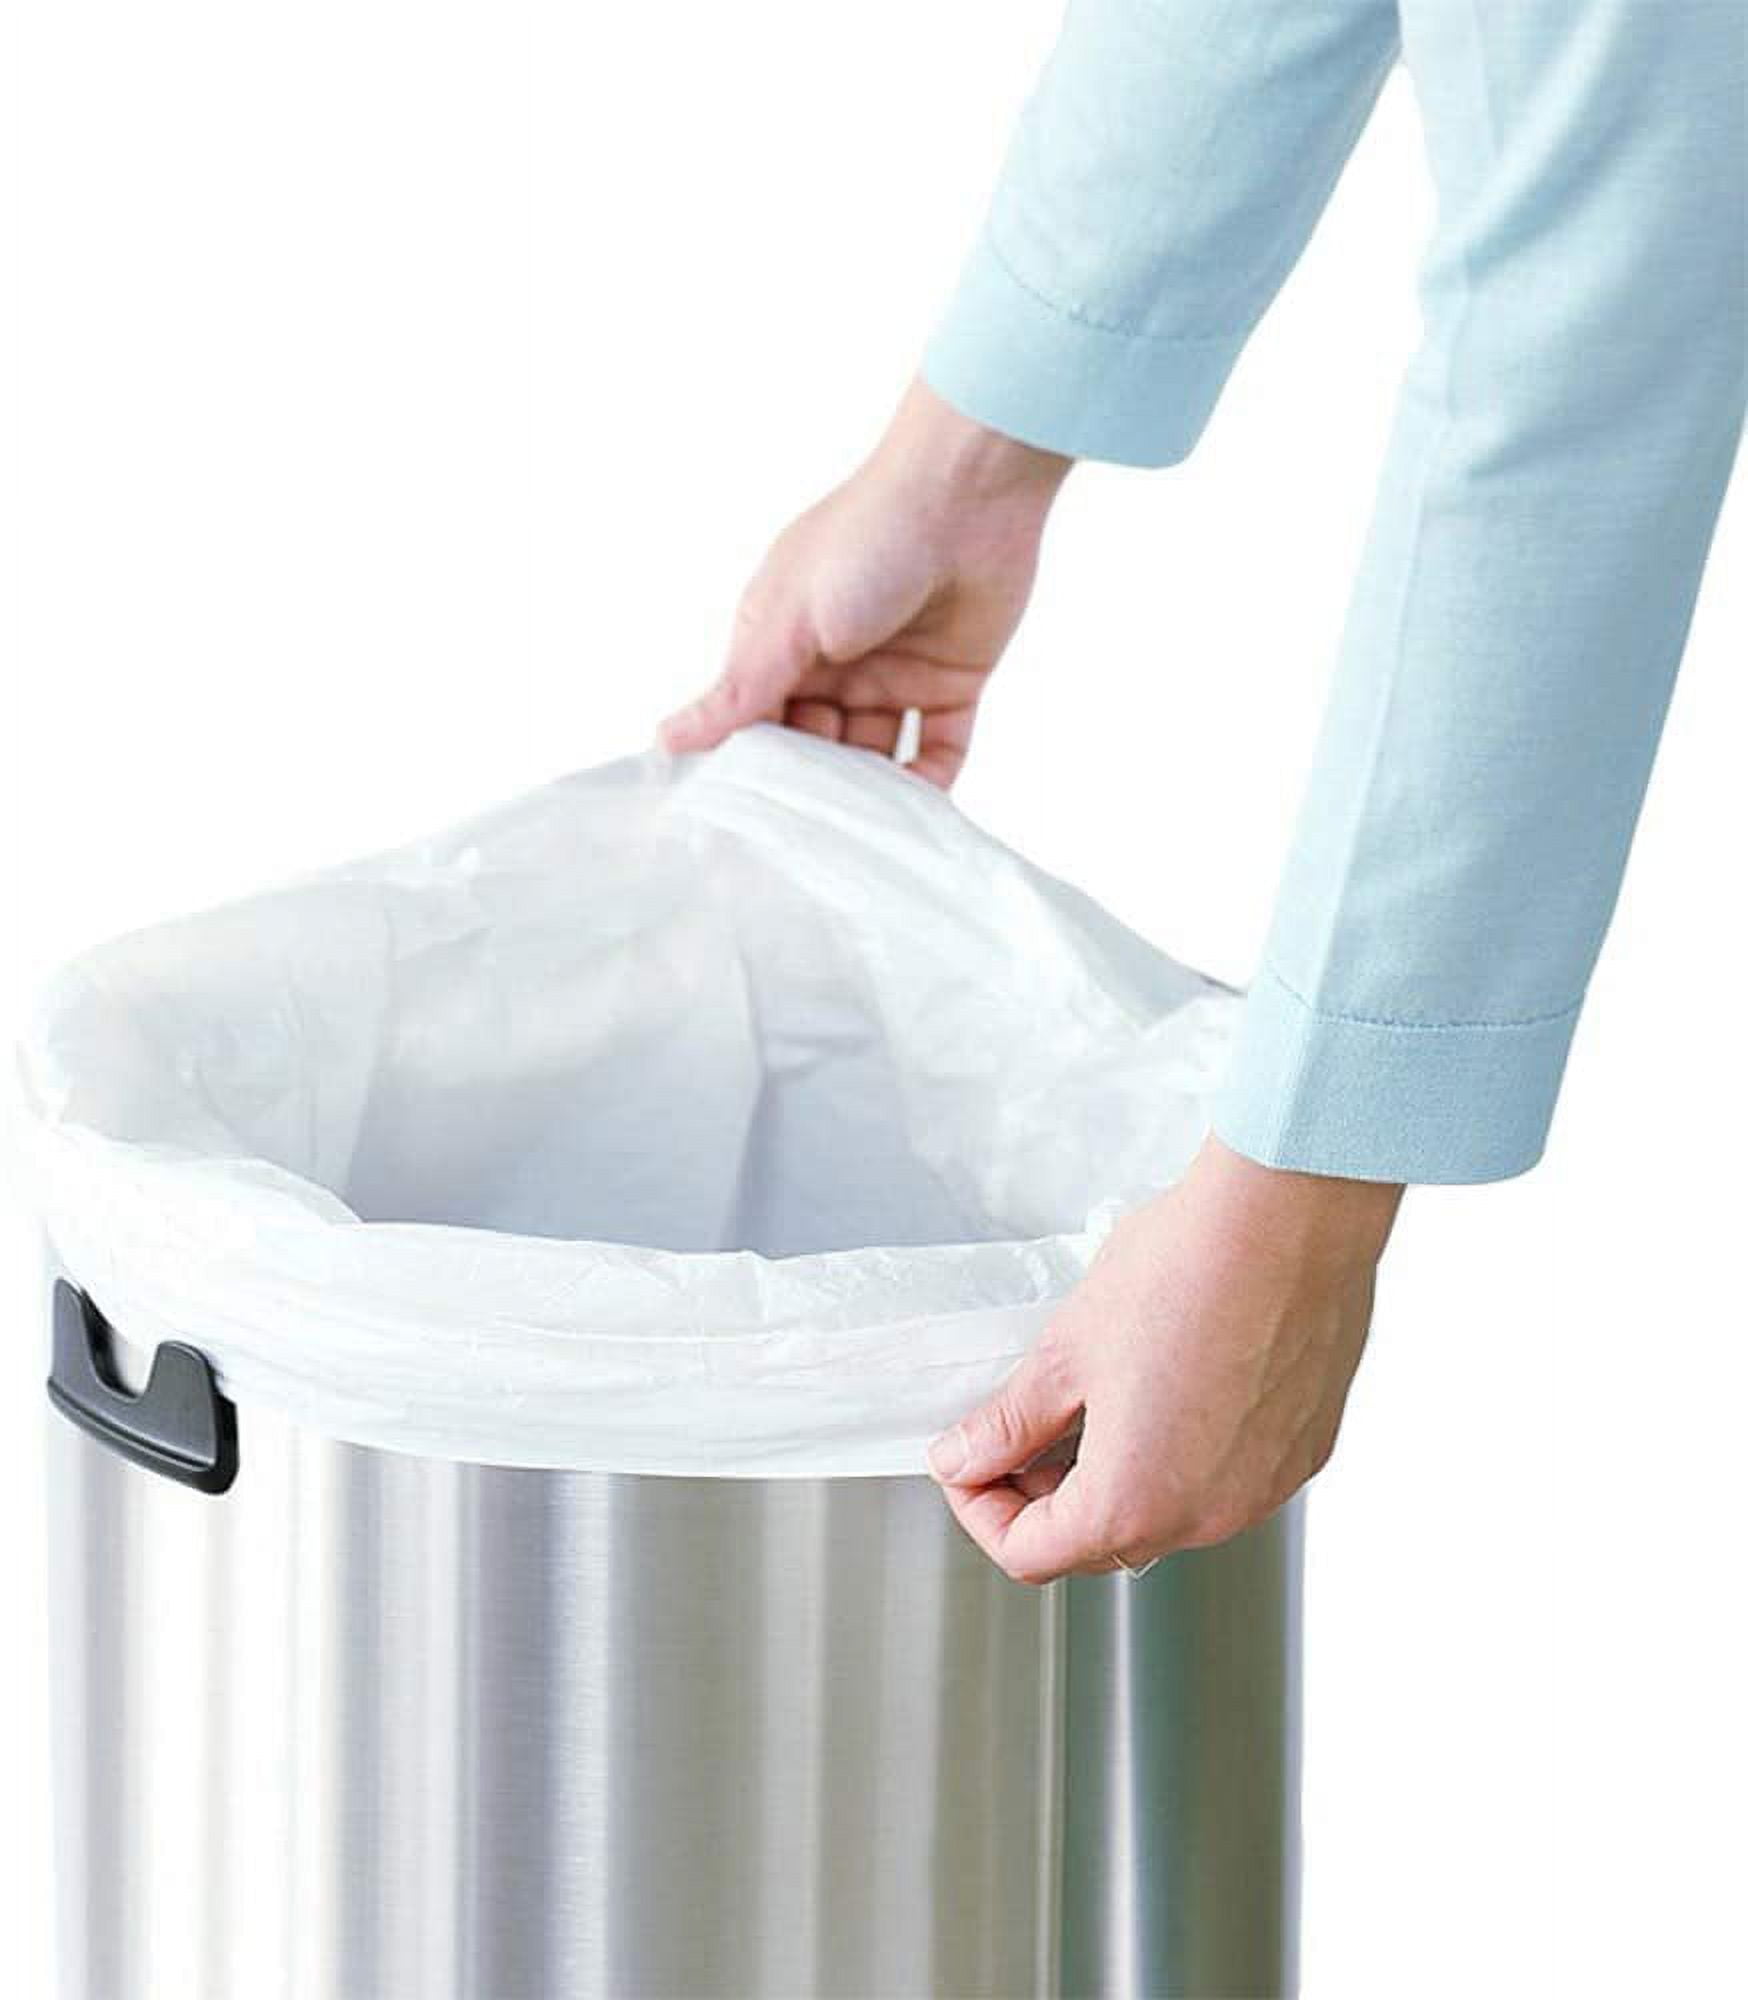 Berry Plastics LBR3036MC Big City 30 Gallon Garbage Bags / Trash Can  Liners, 0.5 Mil, 30 x 36, Clear - 250 / Case